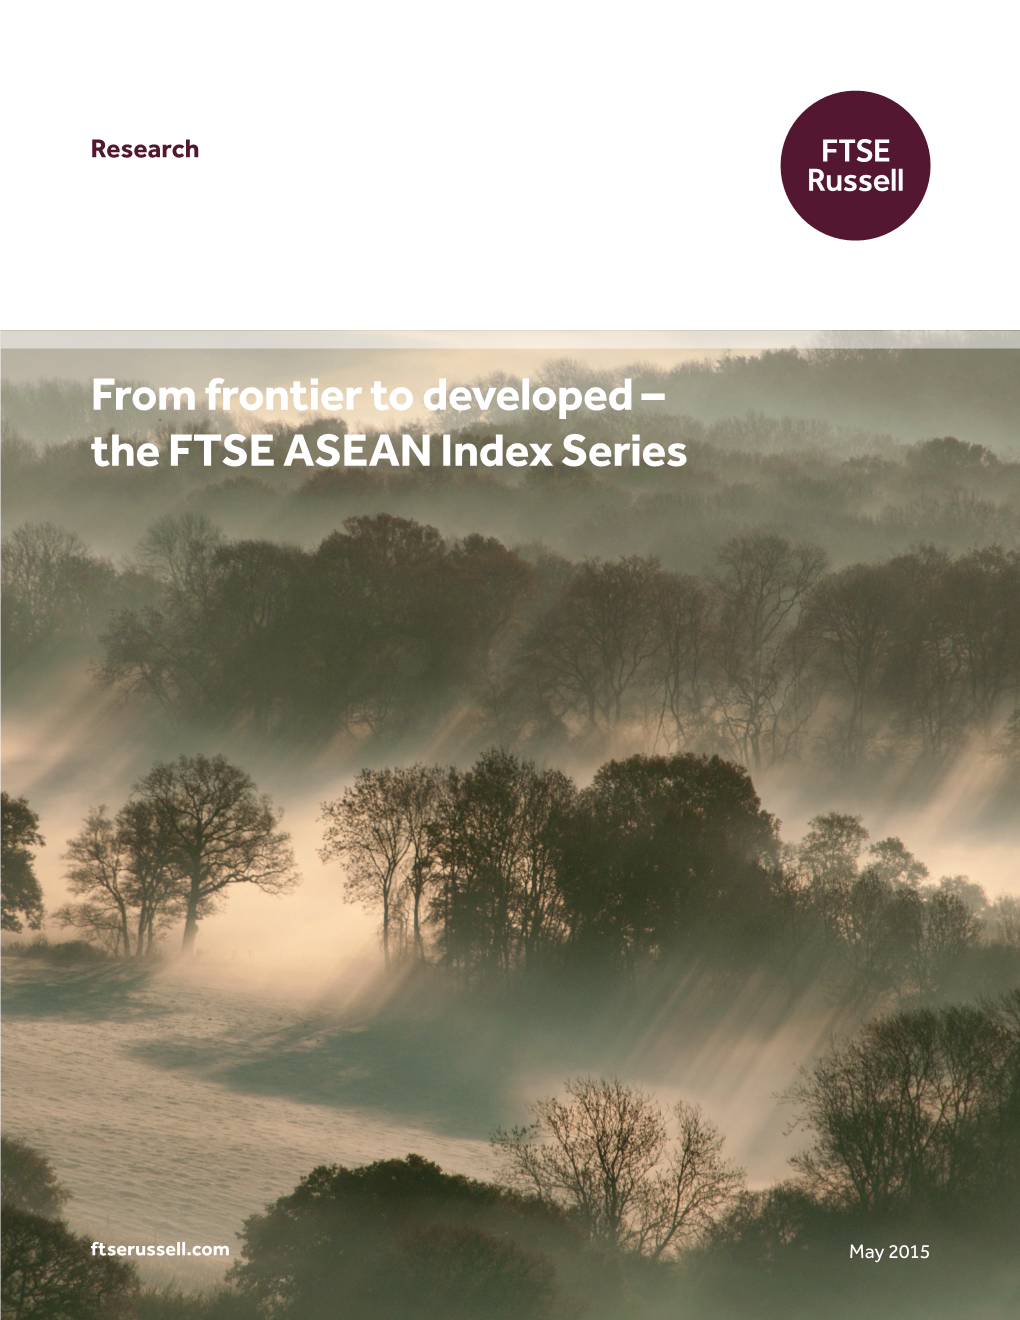 The FTSE ASEAN Index Series